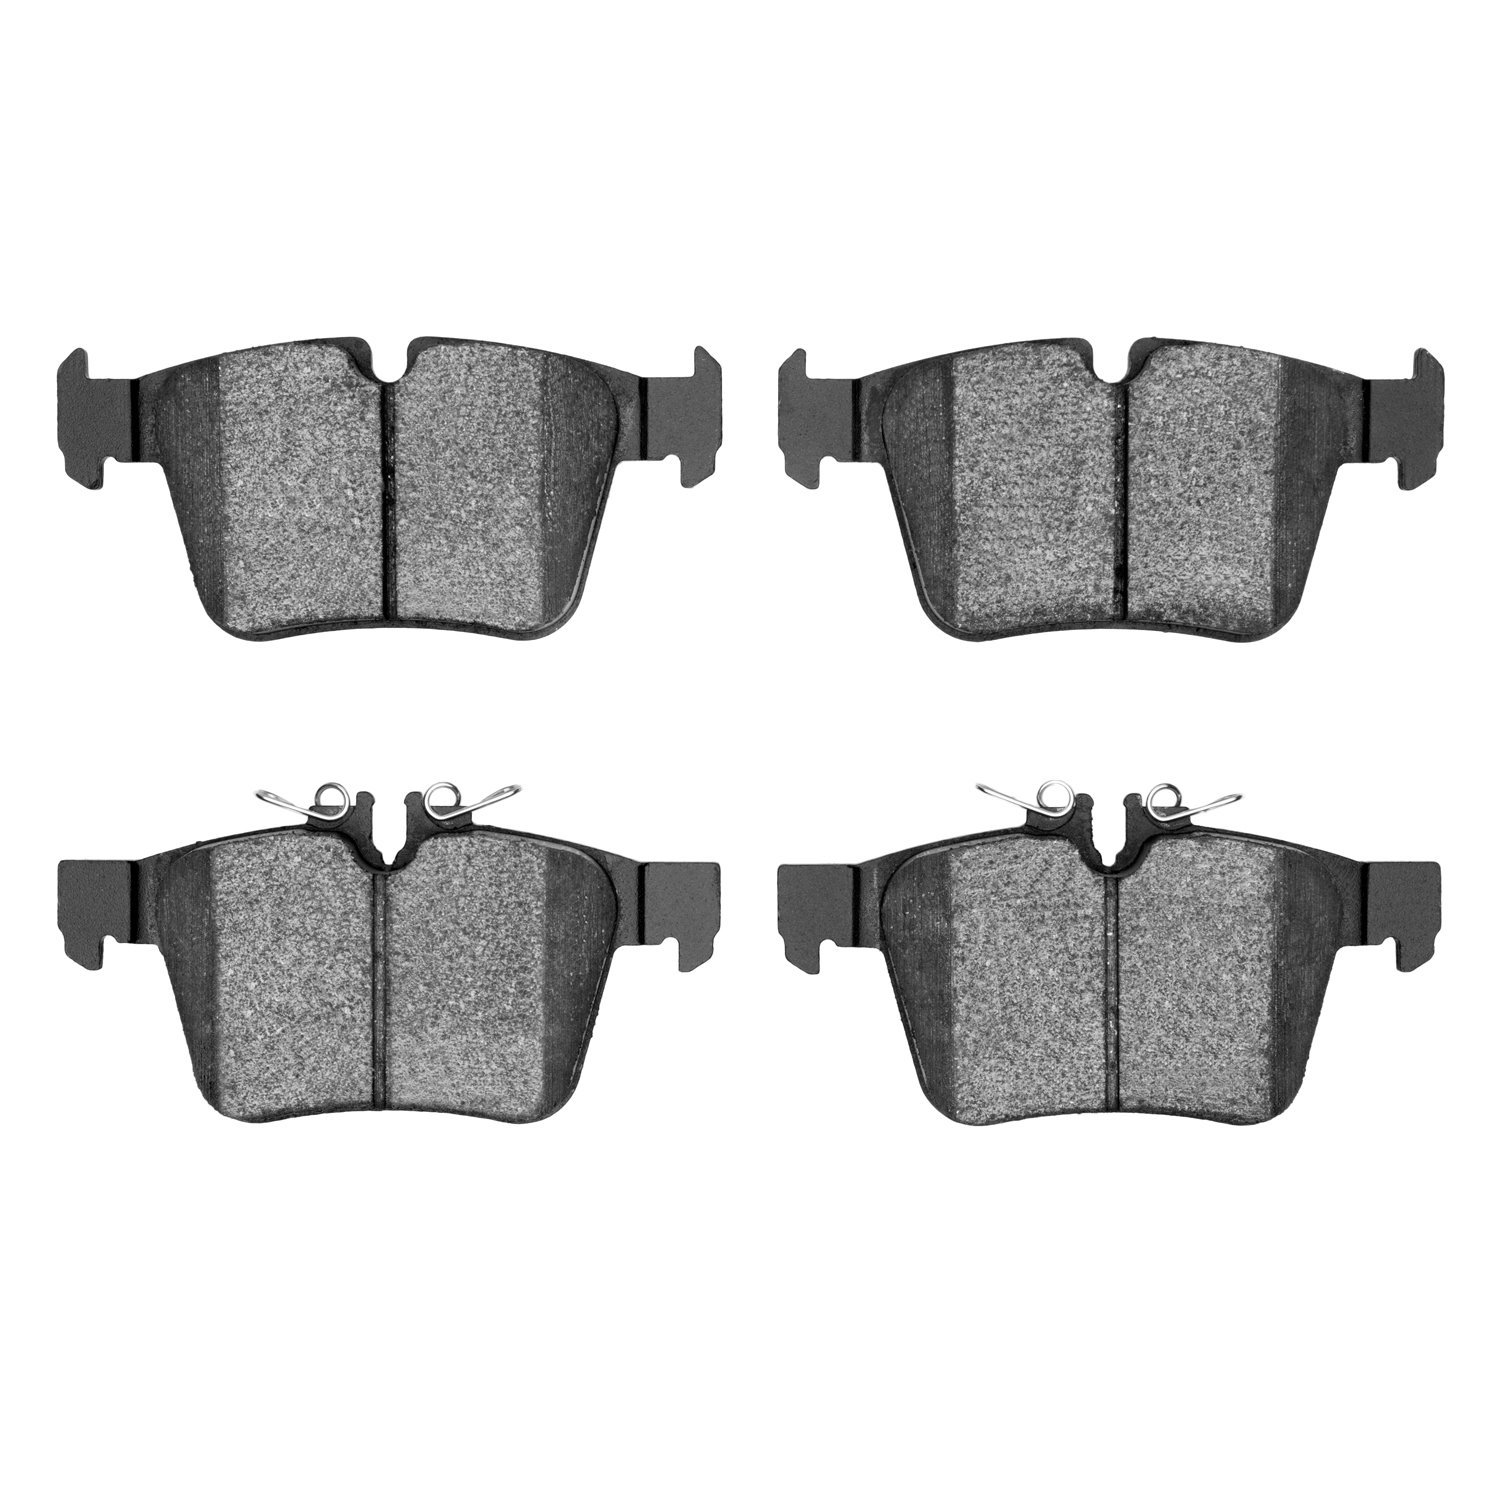 Euro Ceramic Brake Pads, Fits Select Mercedes-Benz, Position: Rear